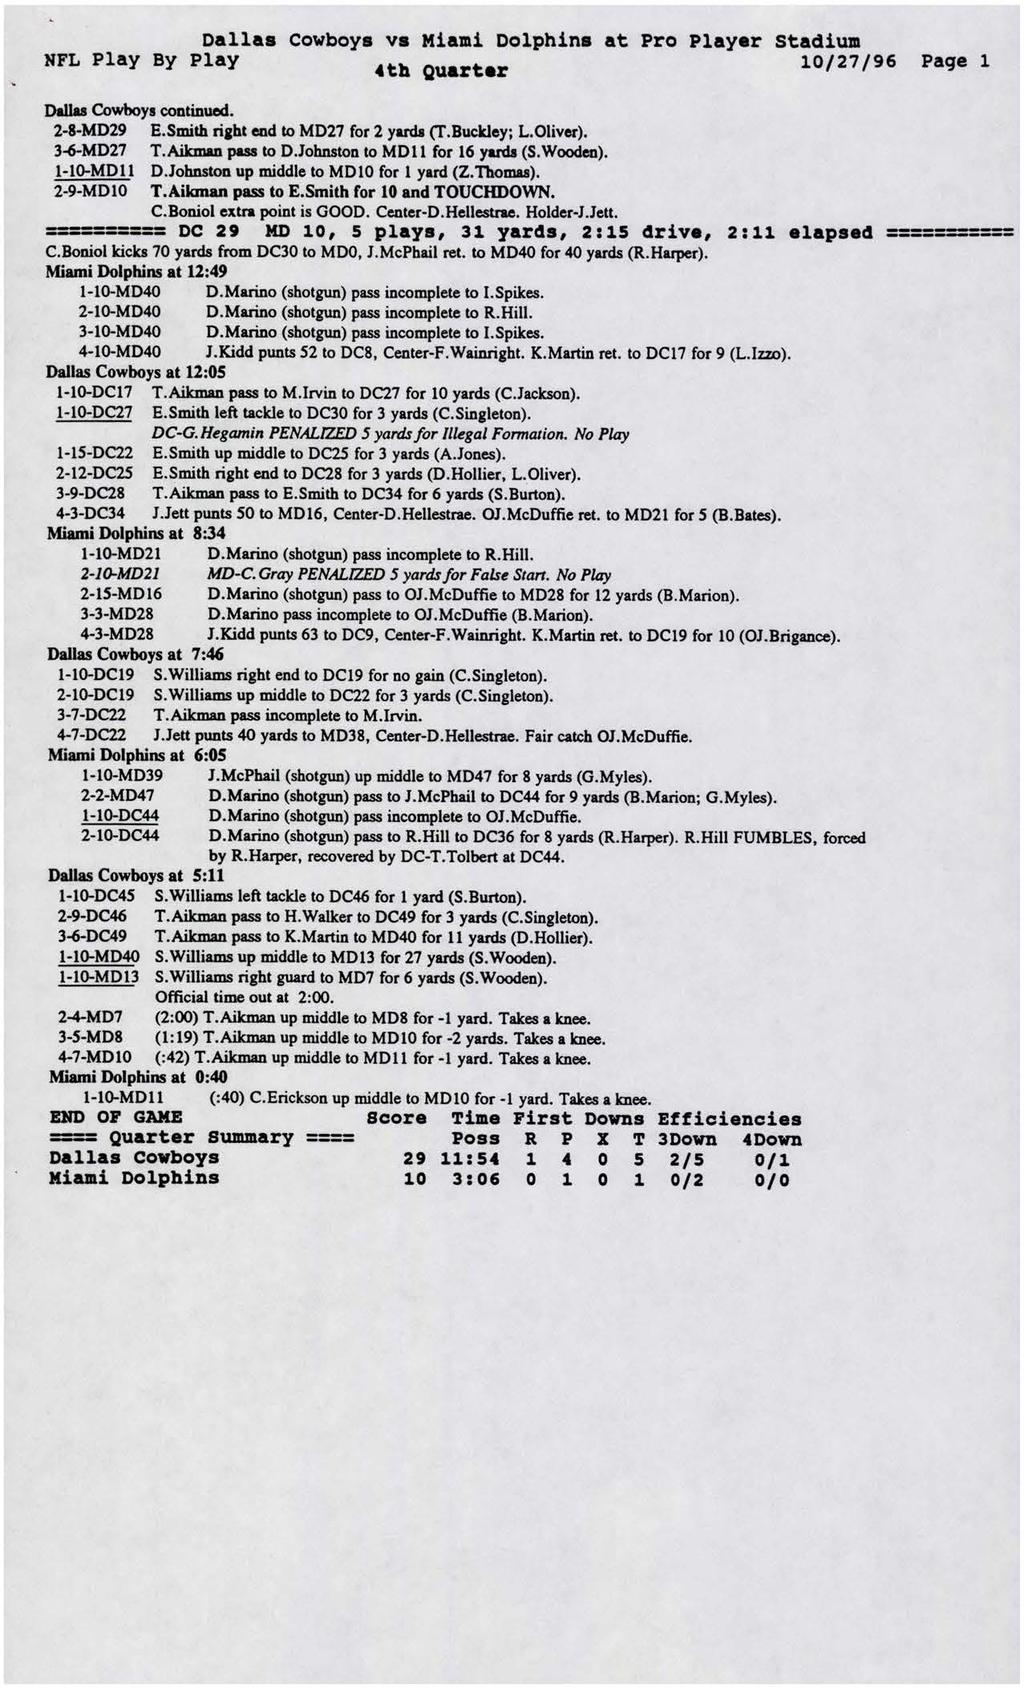 Dallas Cowboys vs Miami Dolphins at Pro Player Stadium 4th Quarter NFL Play By Play 10/27/96 Page 1 Dallas Cowboys continued. 2-8-MD29 E.Smith right end to MD27 for 2 yards (T.Buckley; L.Oliver).